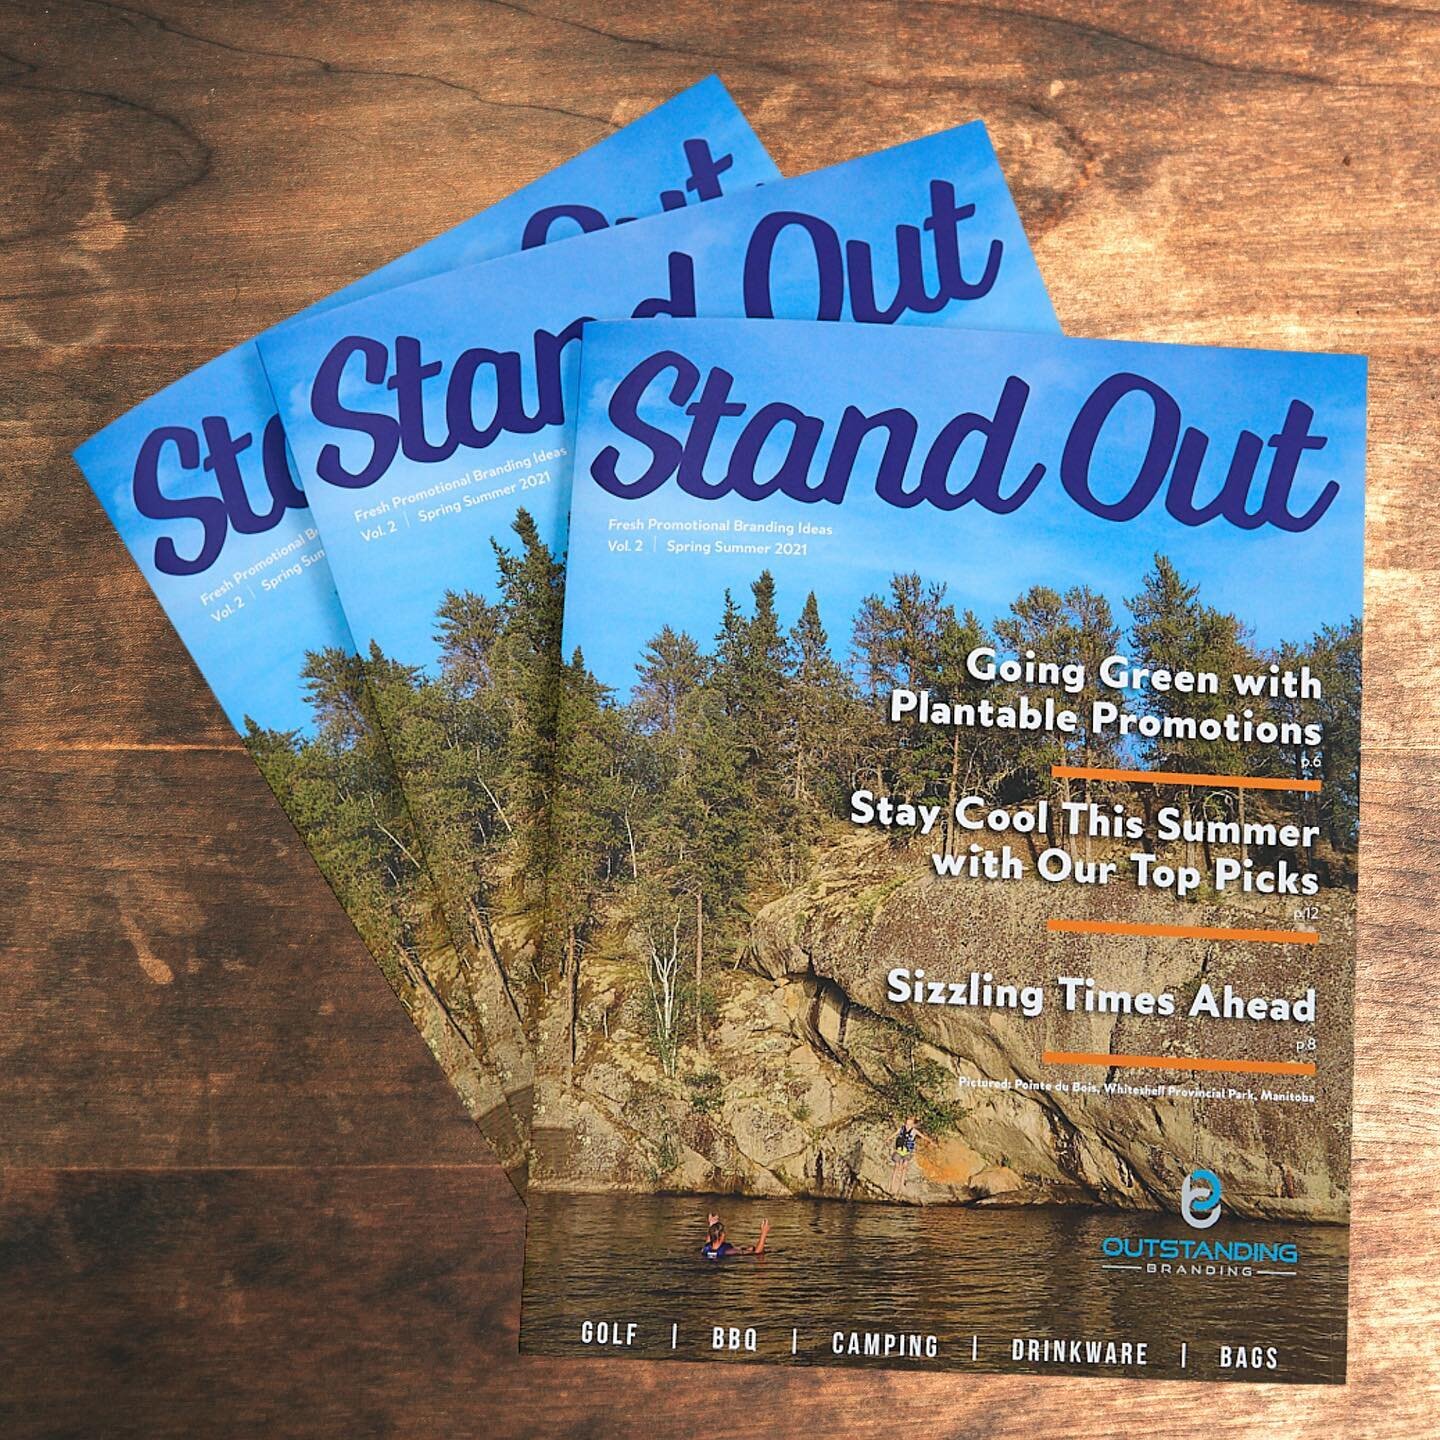 We're so excited to present to you Stand Out! 

Stand Out is our second lookbook, and we chose the name because that&rsquo;s what we want to do for you - help you stand&nbsp;out from the crowd with fresh promotional branding ideas!

This edition of t